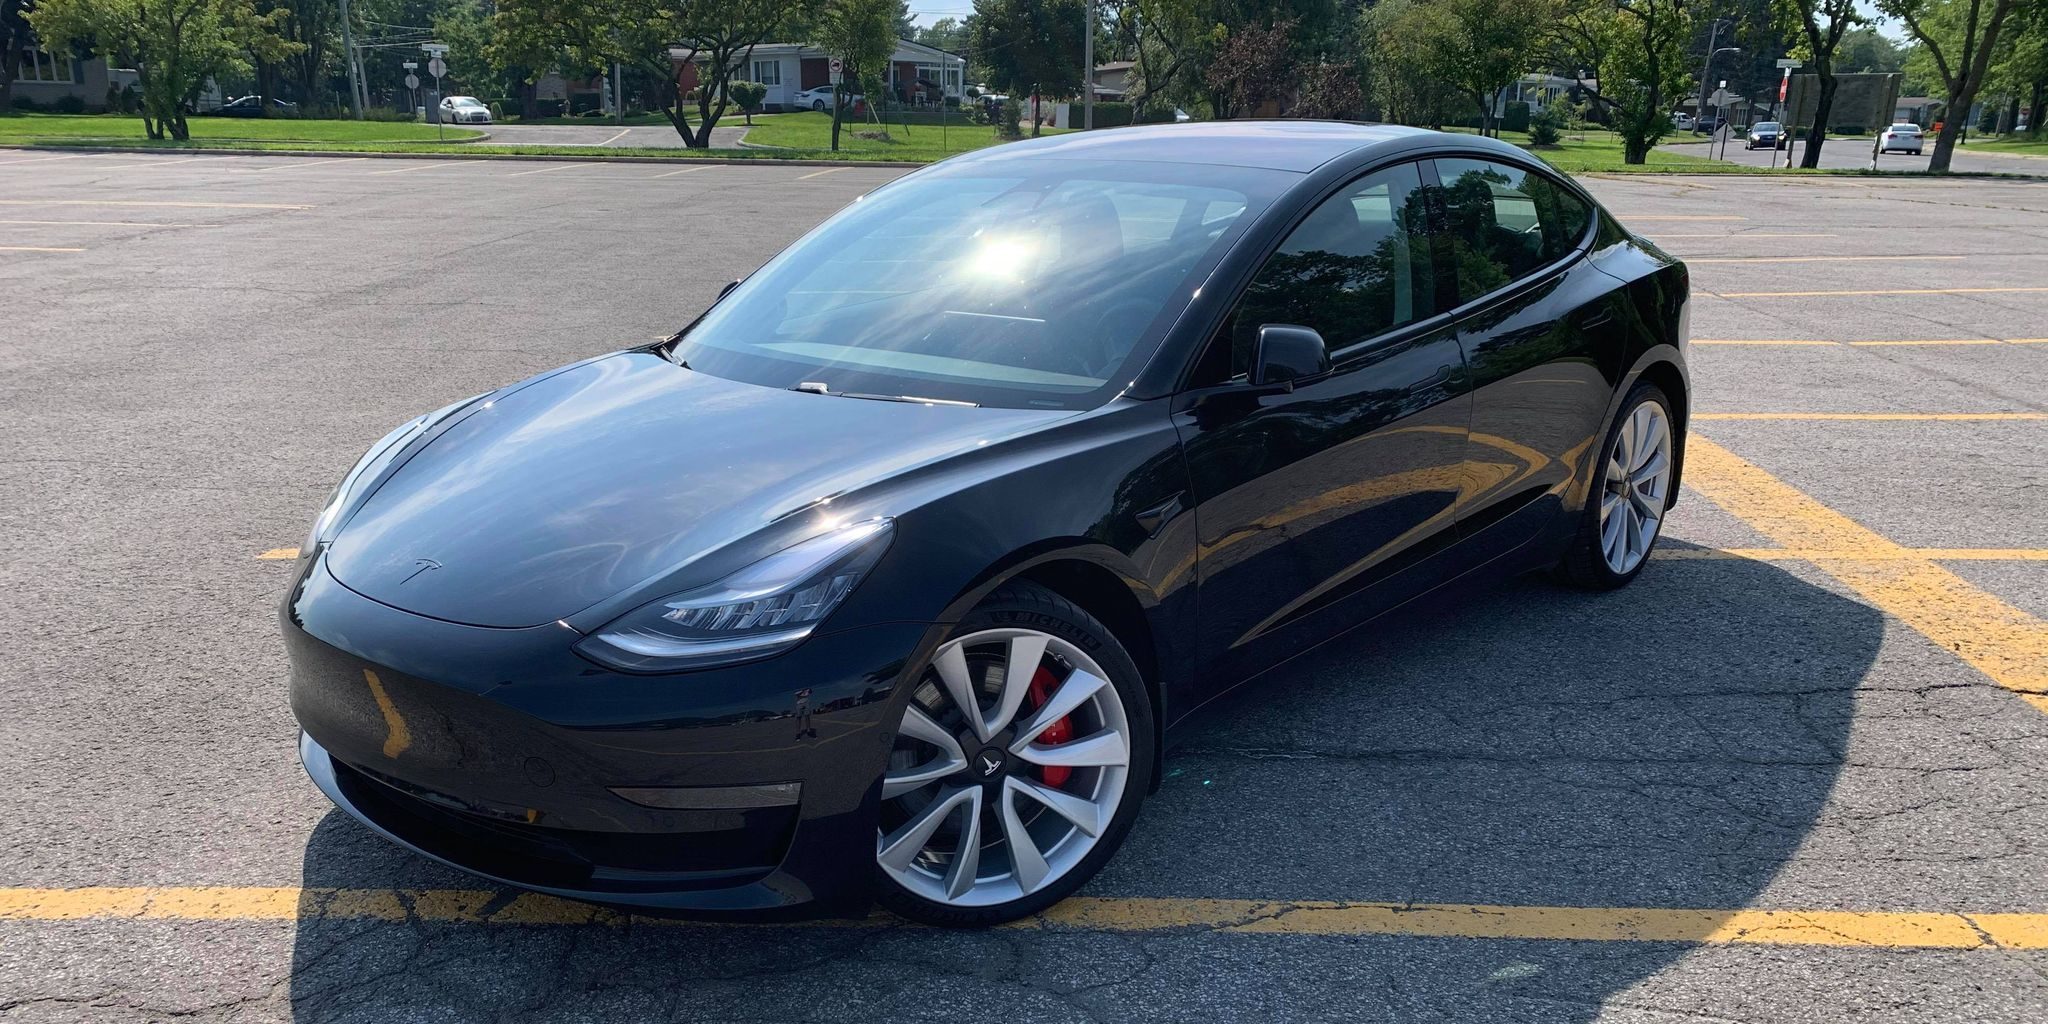 Tesla confirms a new 82 kWh battery pack on the Model 3, thanks to the new cells

